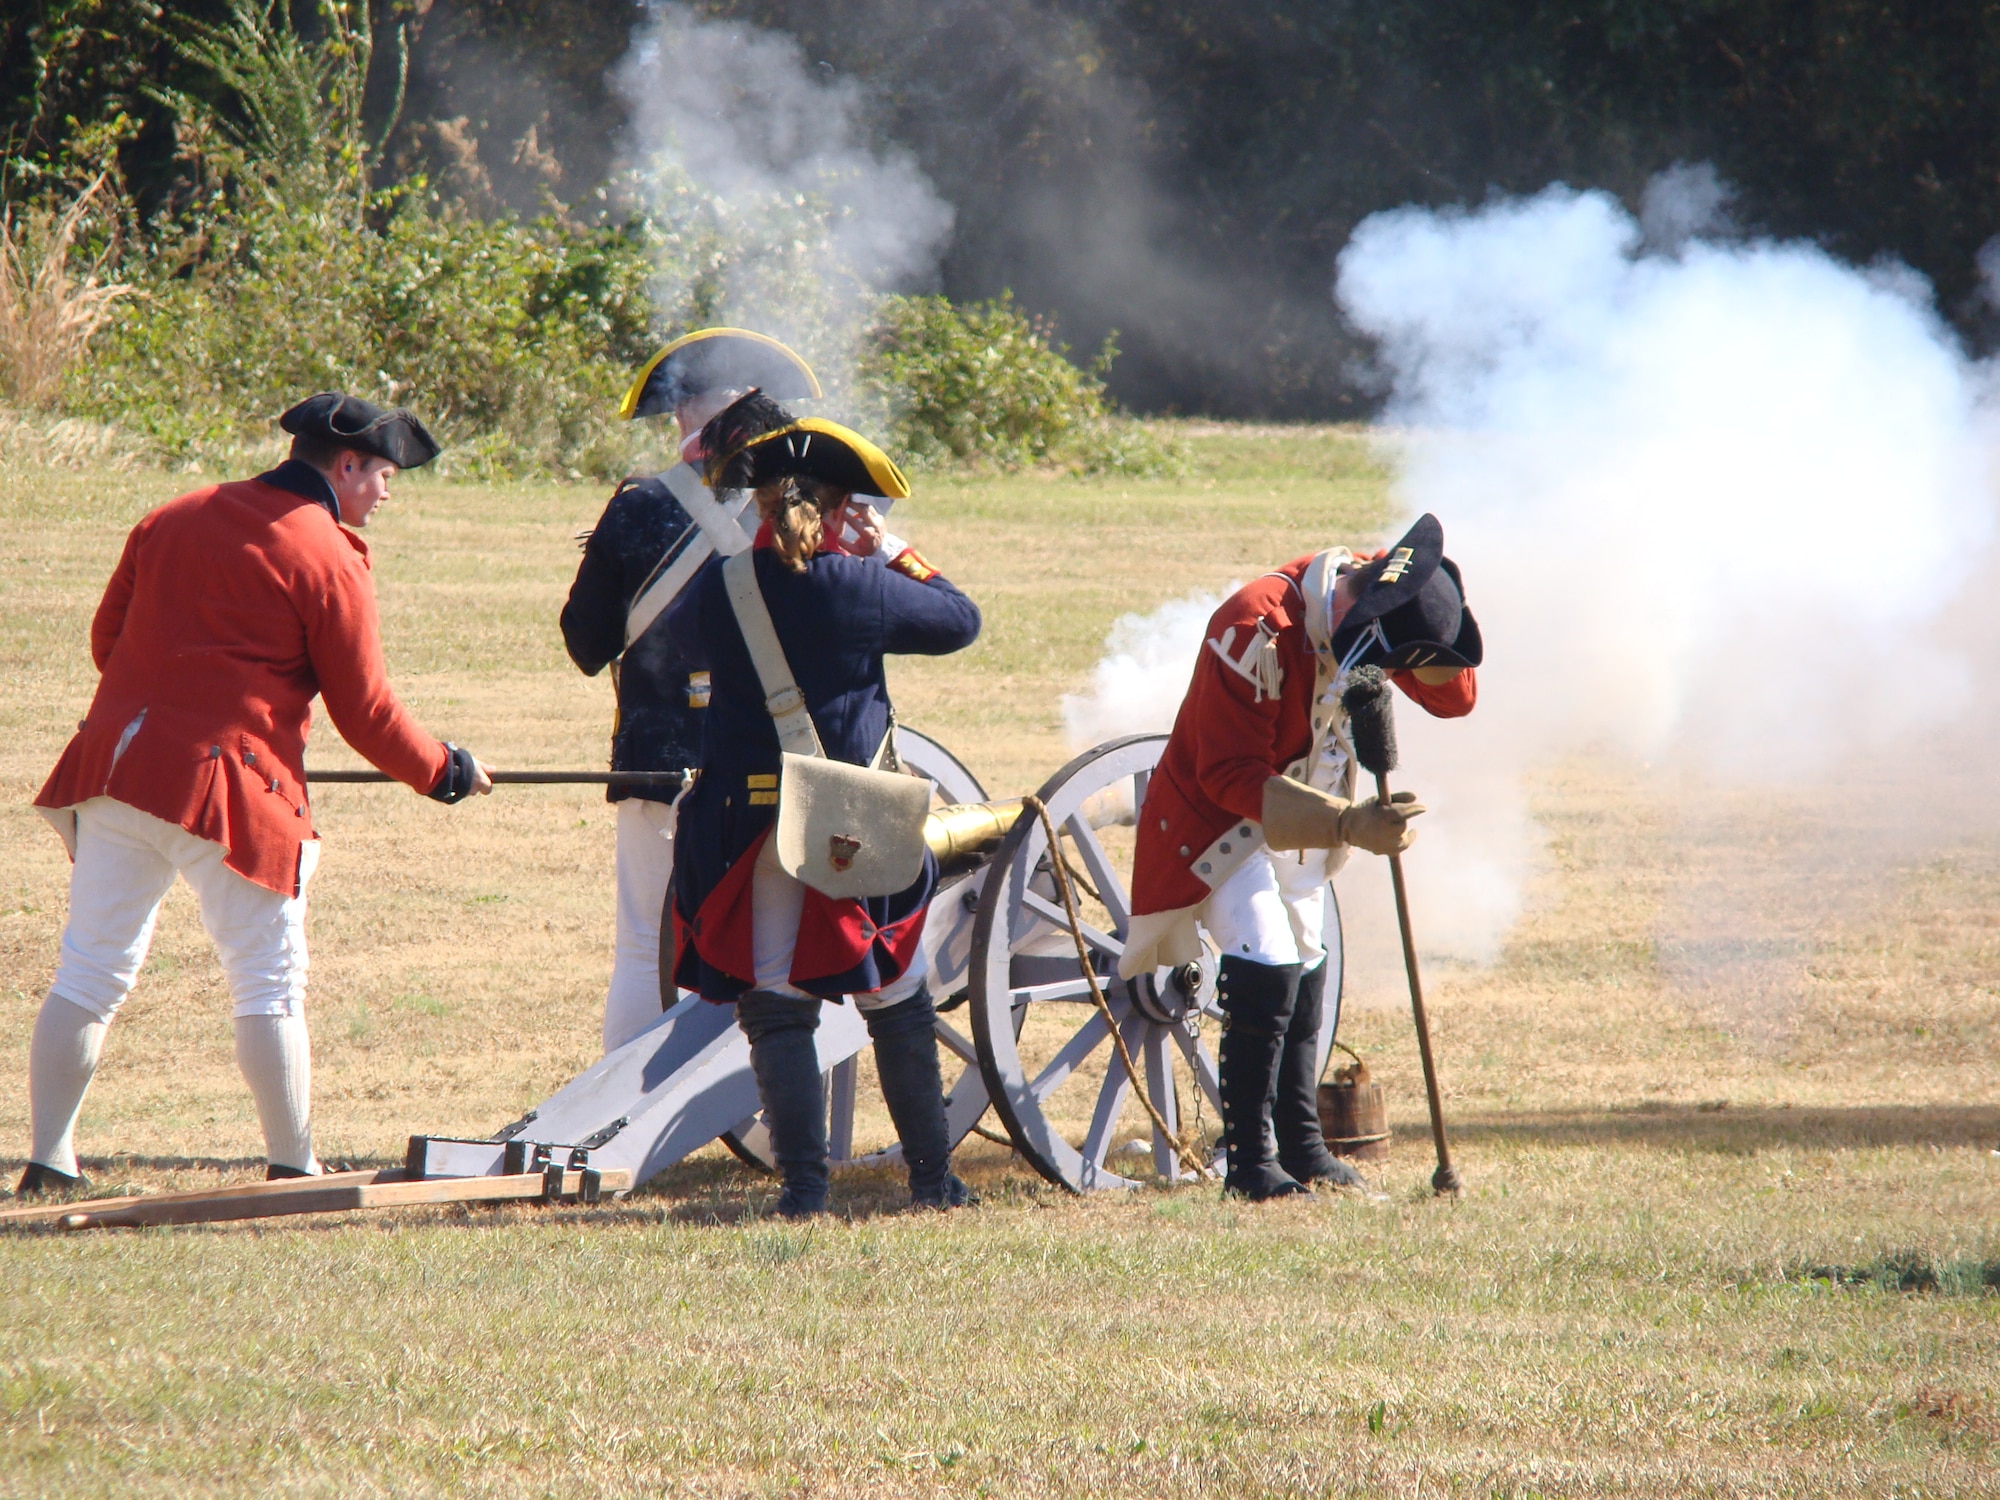 Portraying soldiers of Great Britain, re-enactors fire their cannon at advancing rebel troops of the American Continental Army, at Camden, S.C., about 25 miles north of Shaw Air Force Base, Nov. 3, 2012. More than 200 re-enactors, including many military veterans, brought the Camden battlefield back to life 232 years after the event. (U.S. Air Force photo by Rob Sexton/Released)